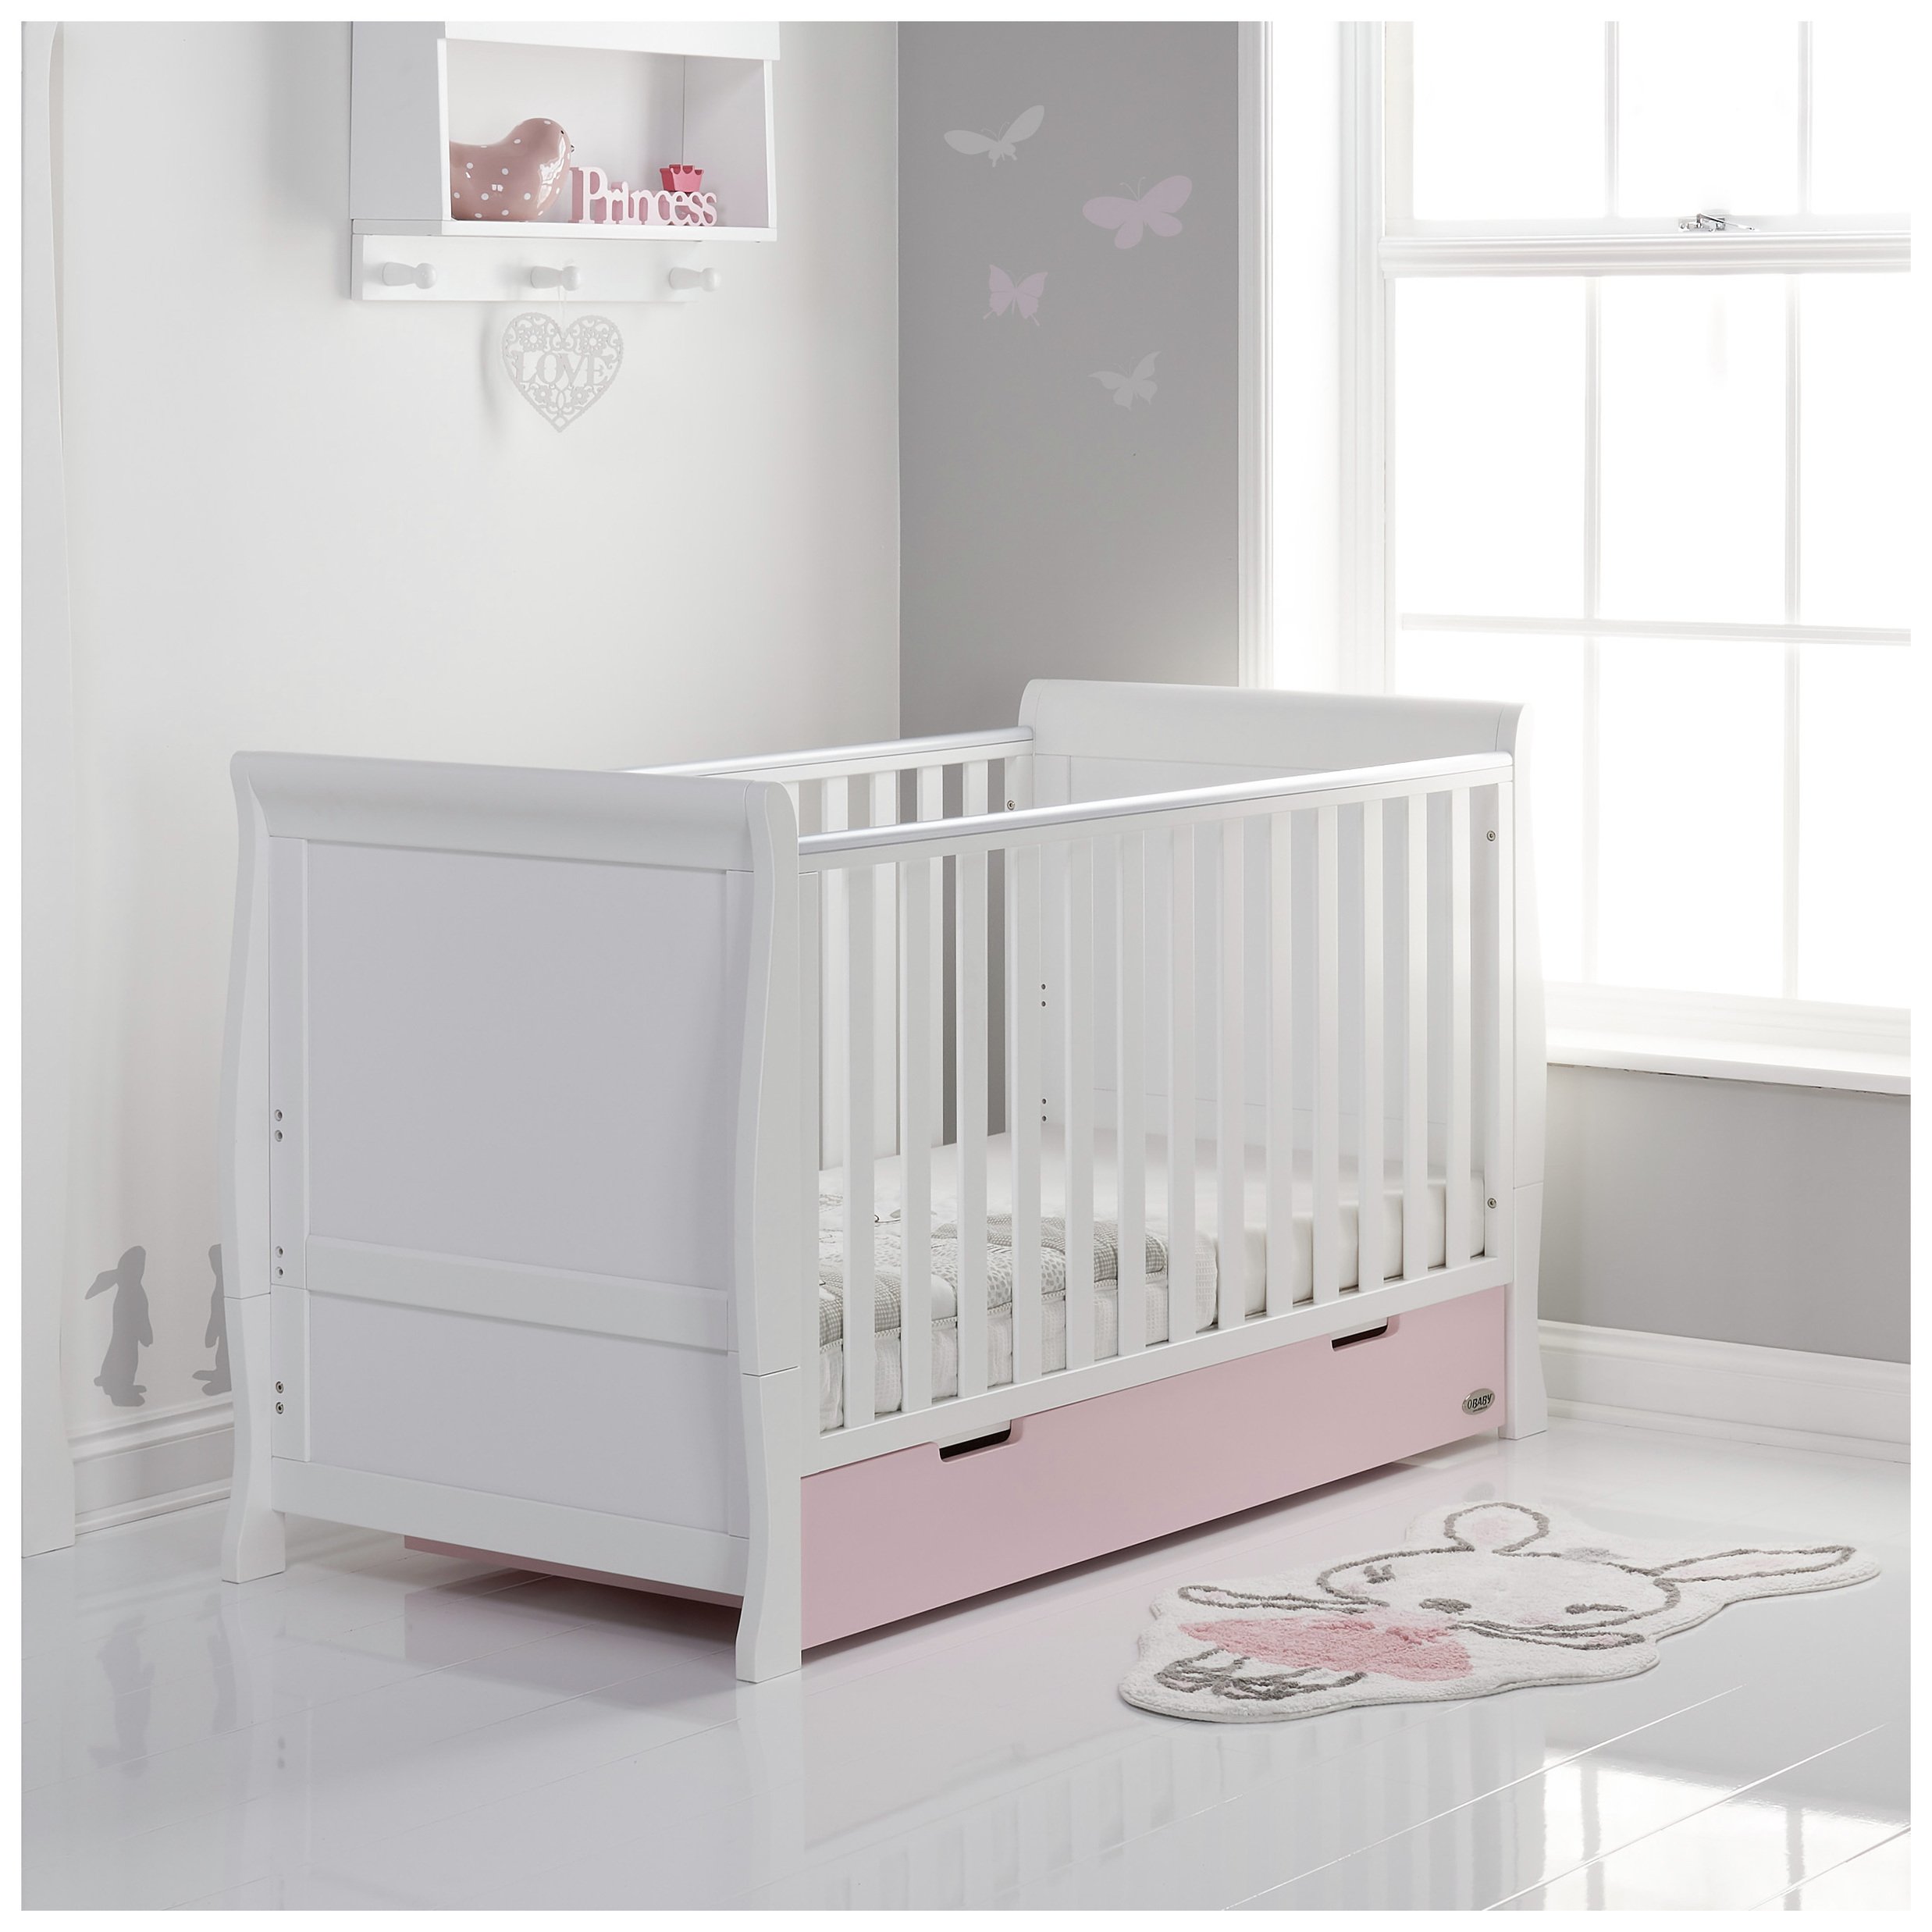 Obaby Stamford Classic Sleigh Cot Bed - White & Eton Mess